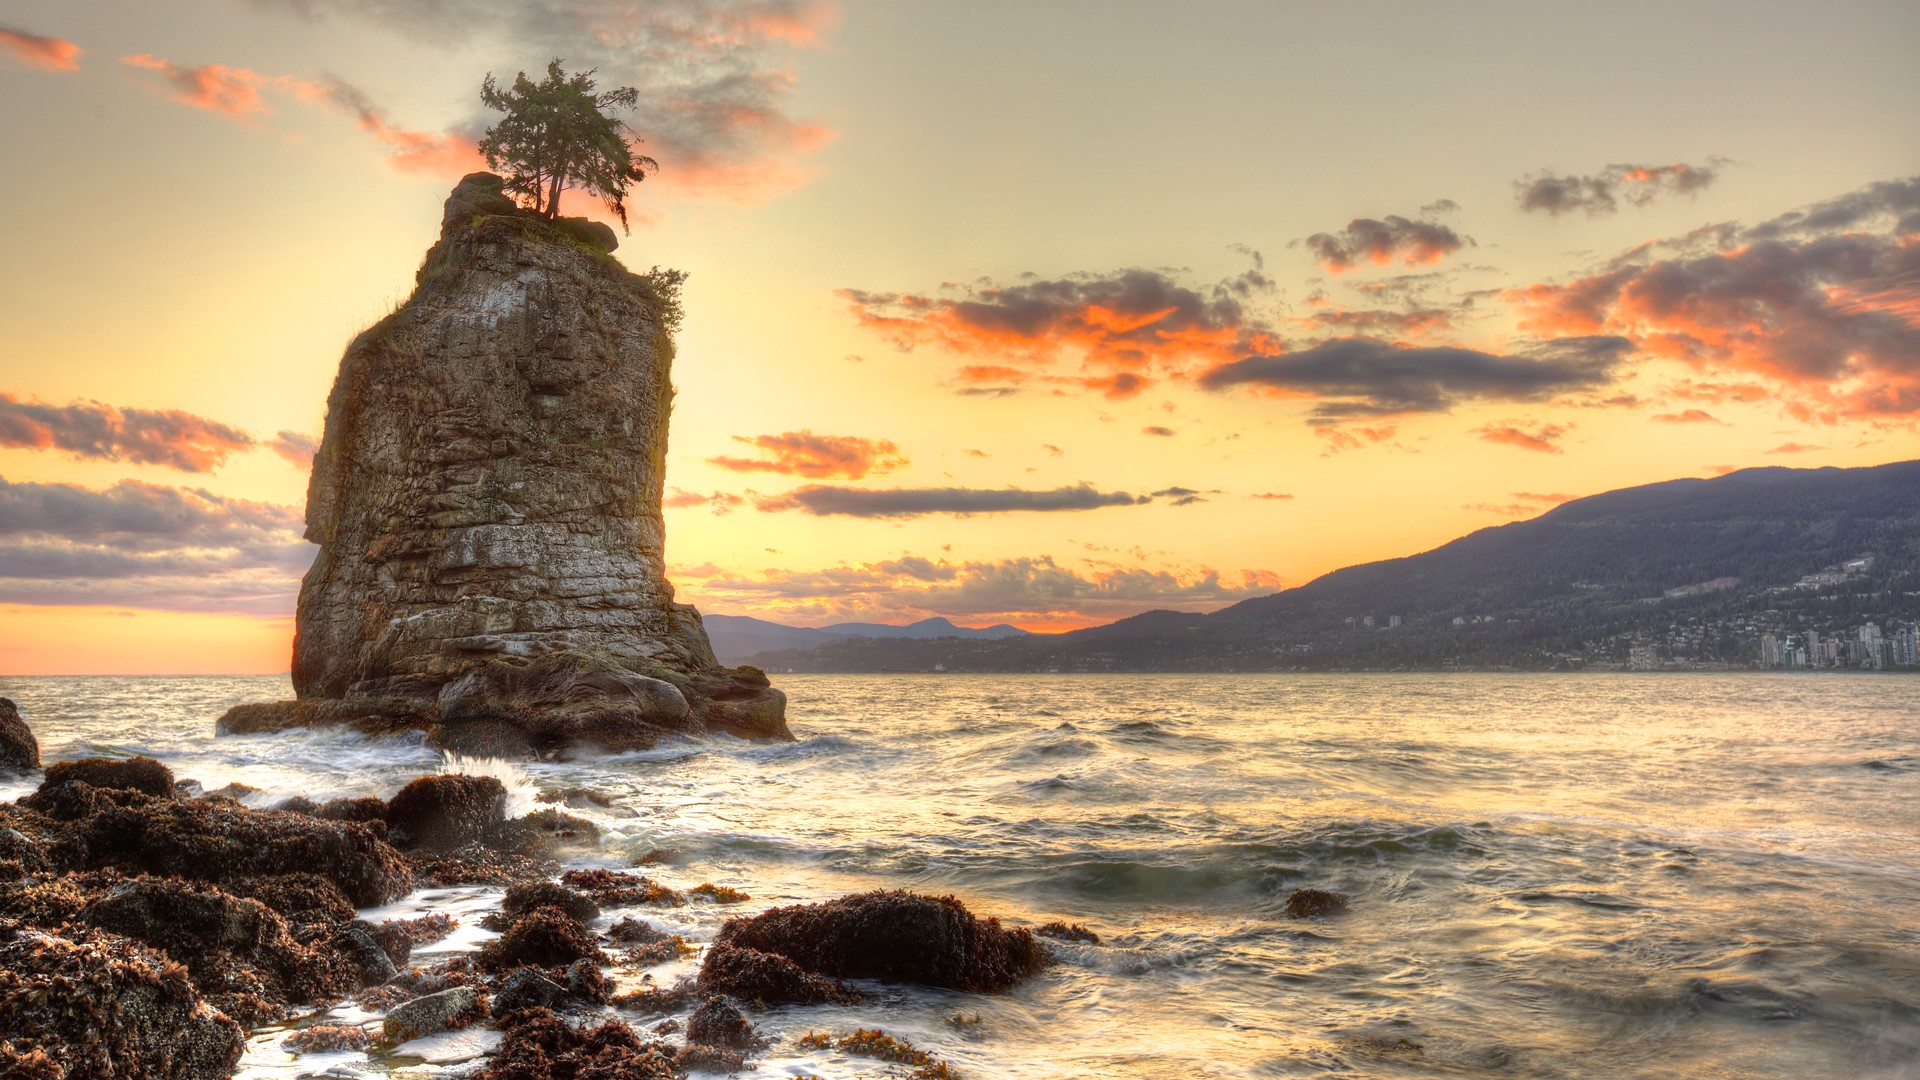 General 1920x1080 nature landscape trees rocks water waves moss sunset sky clouds sea coast town British Columbia Canada